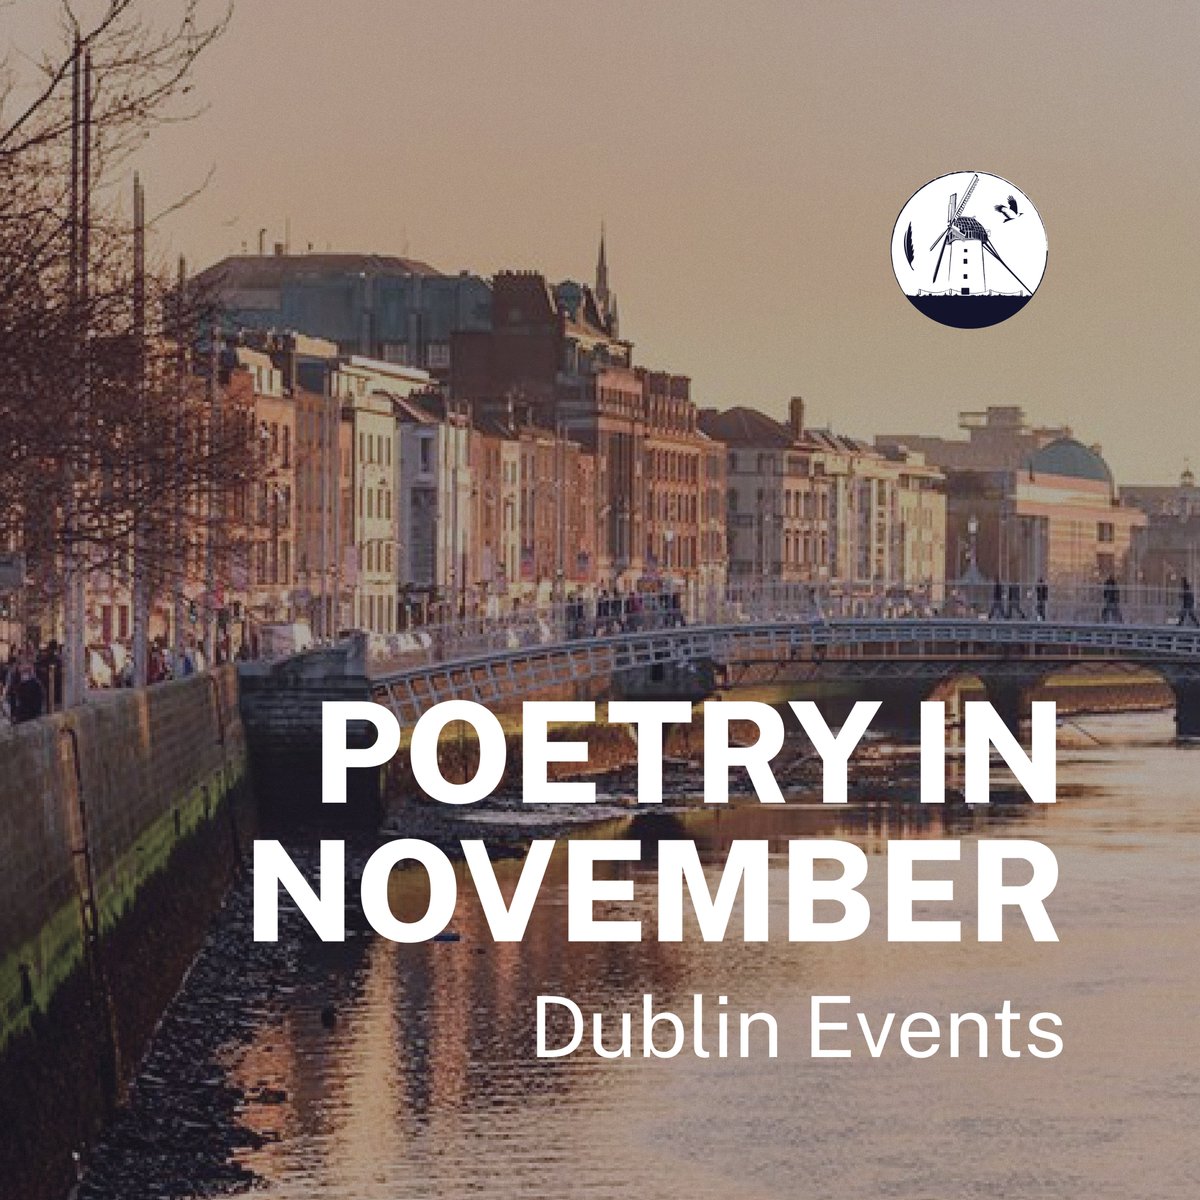 Poetry in November - Dublin Events 📢 We've rounded up this month's slams, open mics, workshops & readings! Make sure to check out @DublinBookFest at dublinbookfestival.com✨ Follow us on Instagram @fingalpoetryfestival or click here for the full list: facebook.com/photo/?fbid=67…